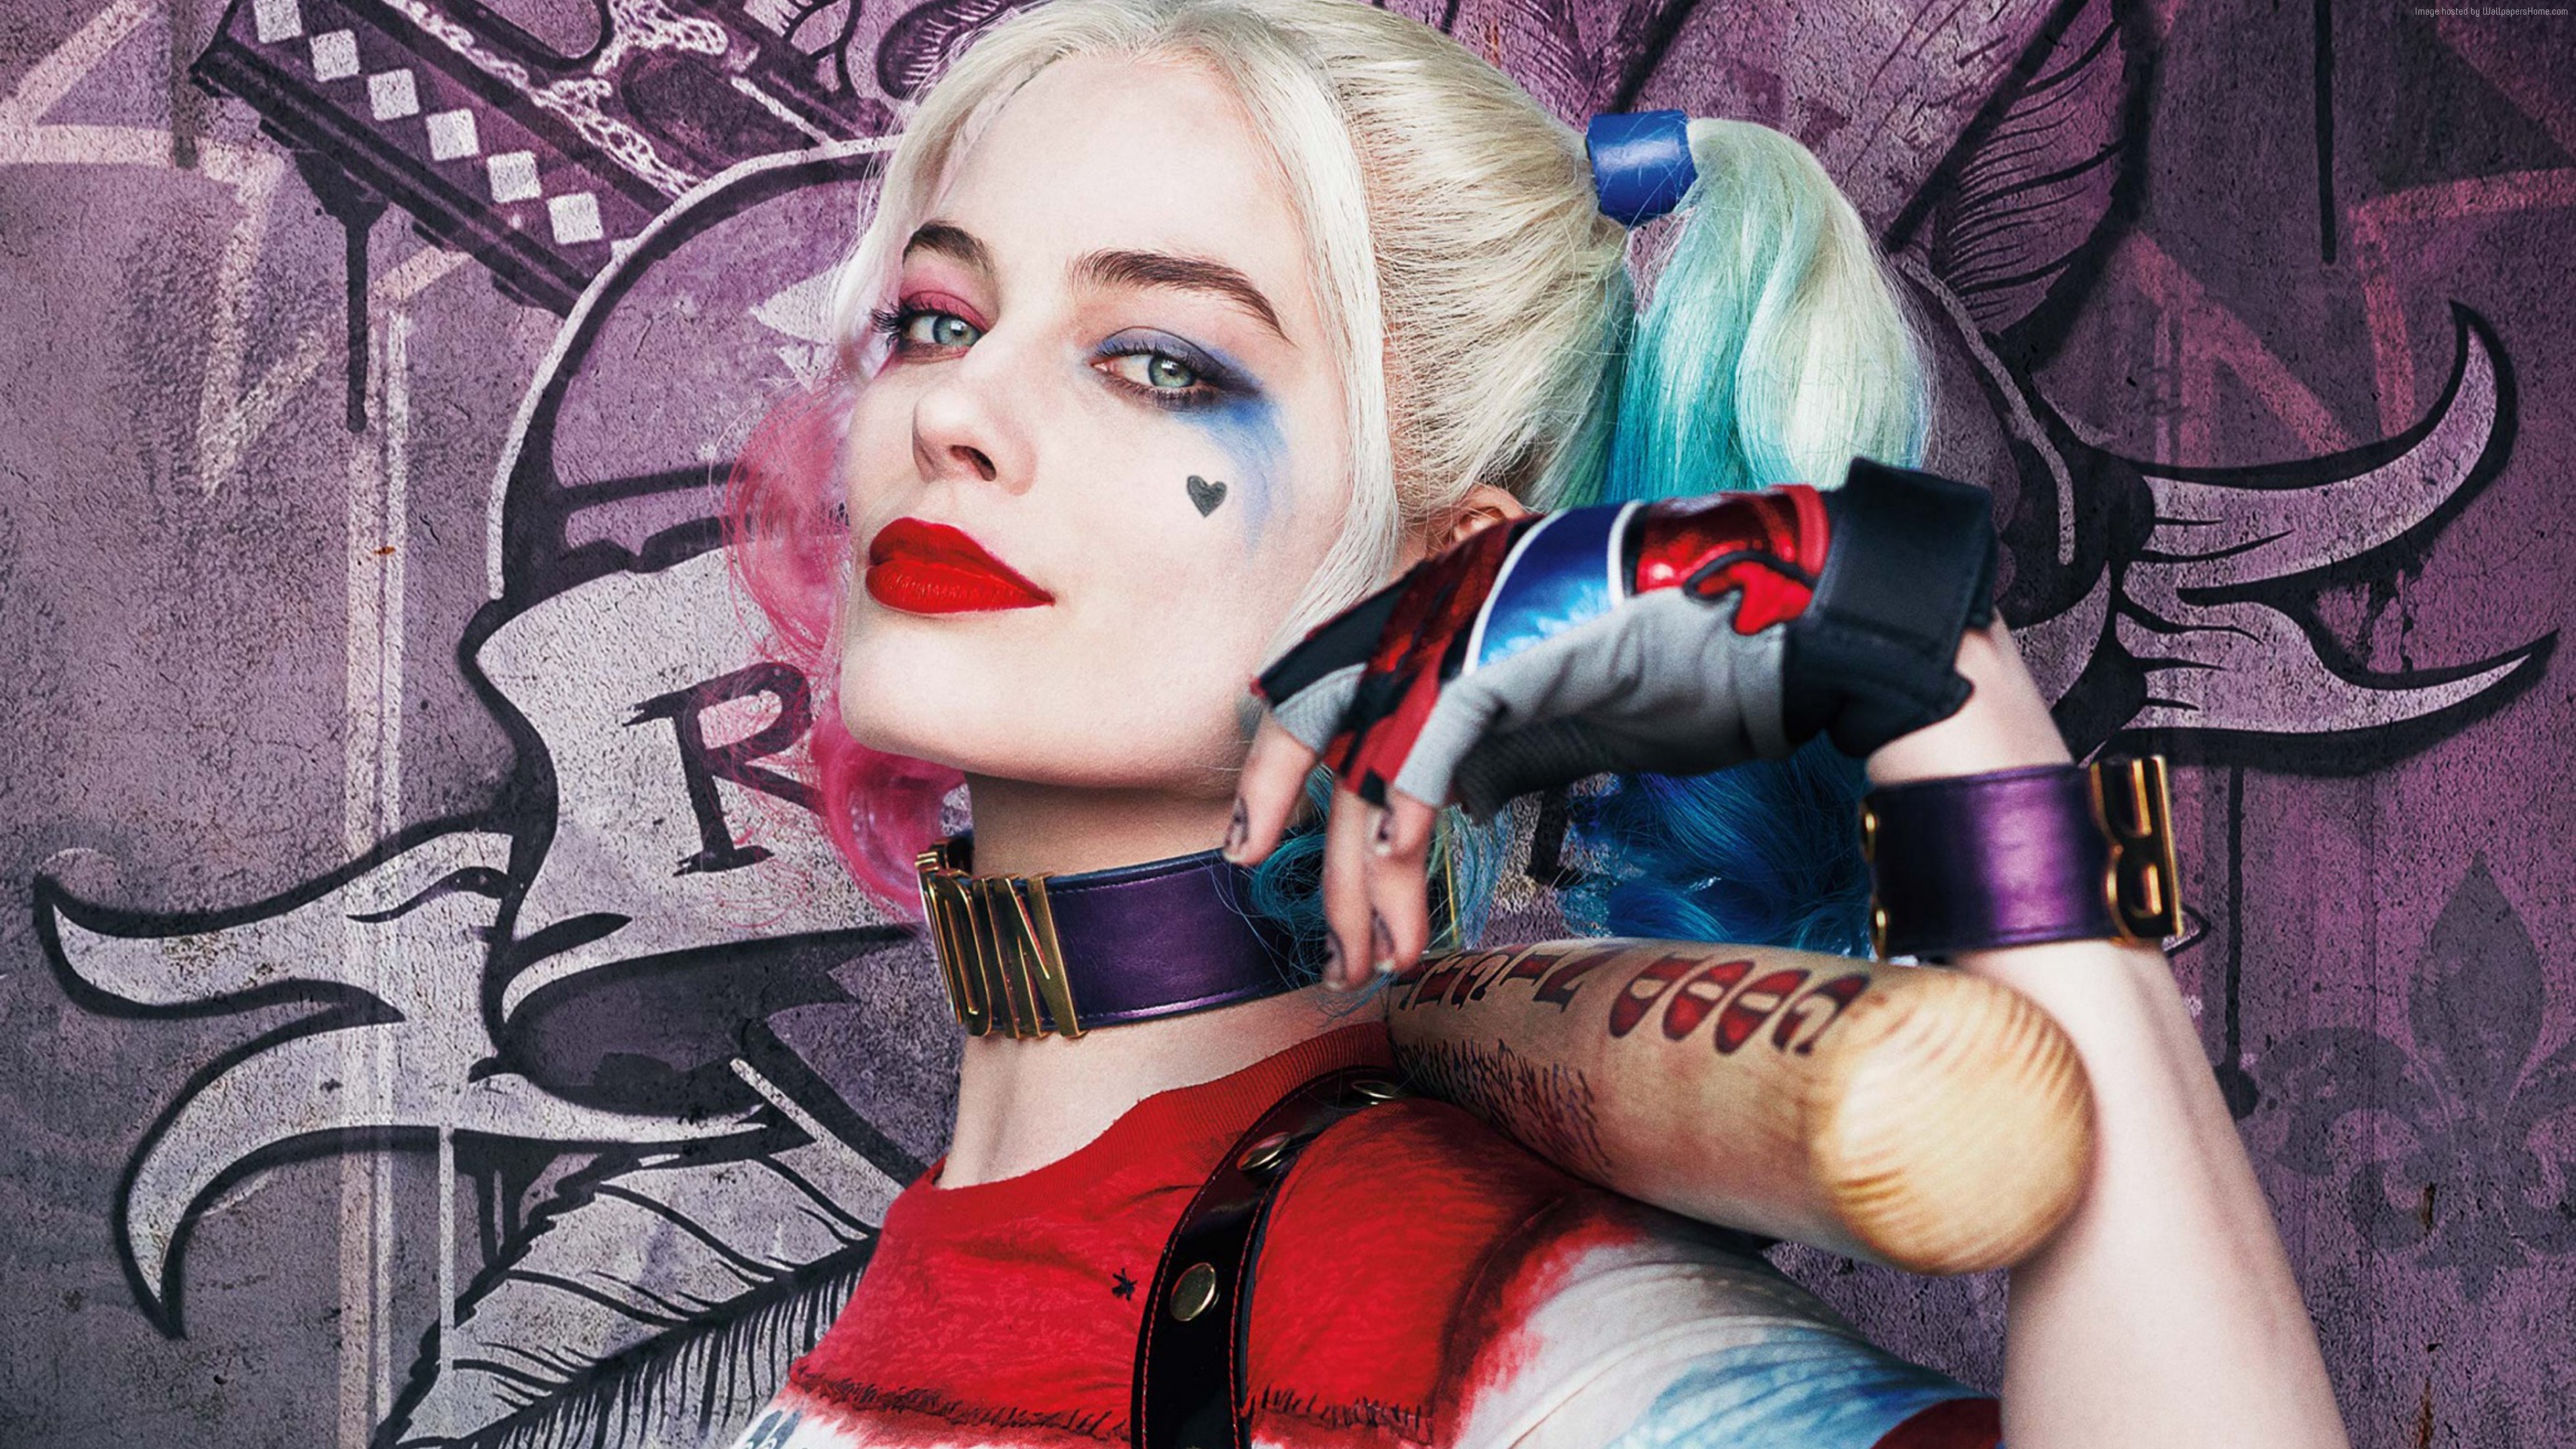 harley quinn suicide squad 2 1536399251 - Harley Quinn Suicide Squad 2 - suicide squad wallpapers, movies wallpapers, harley quinn wallpapers, 2016 movies wallpapers